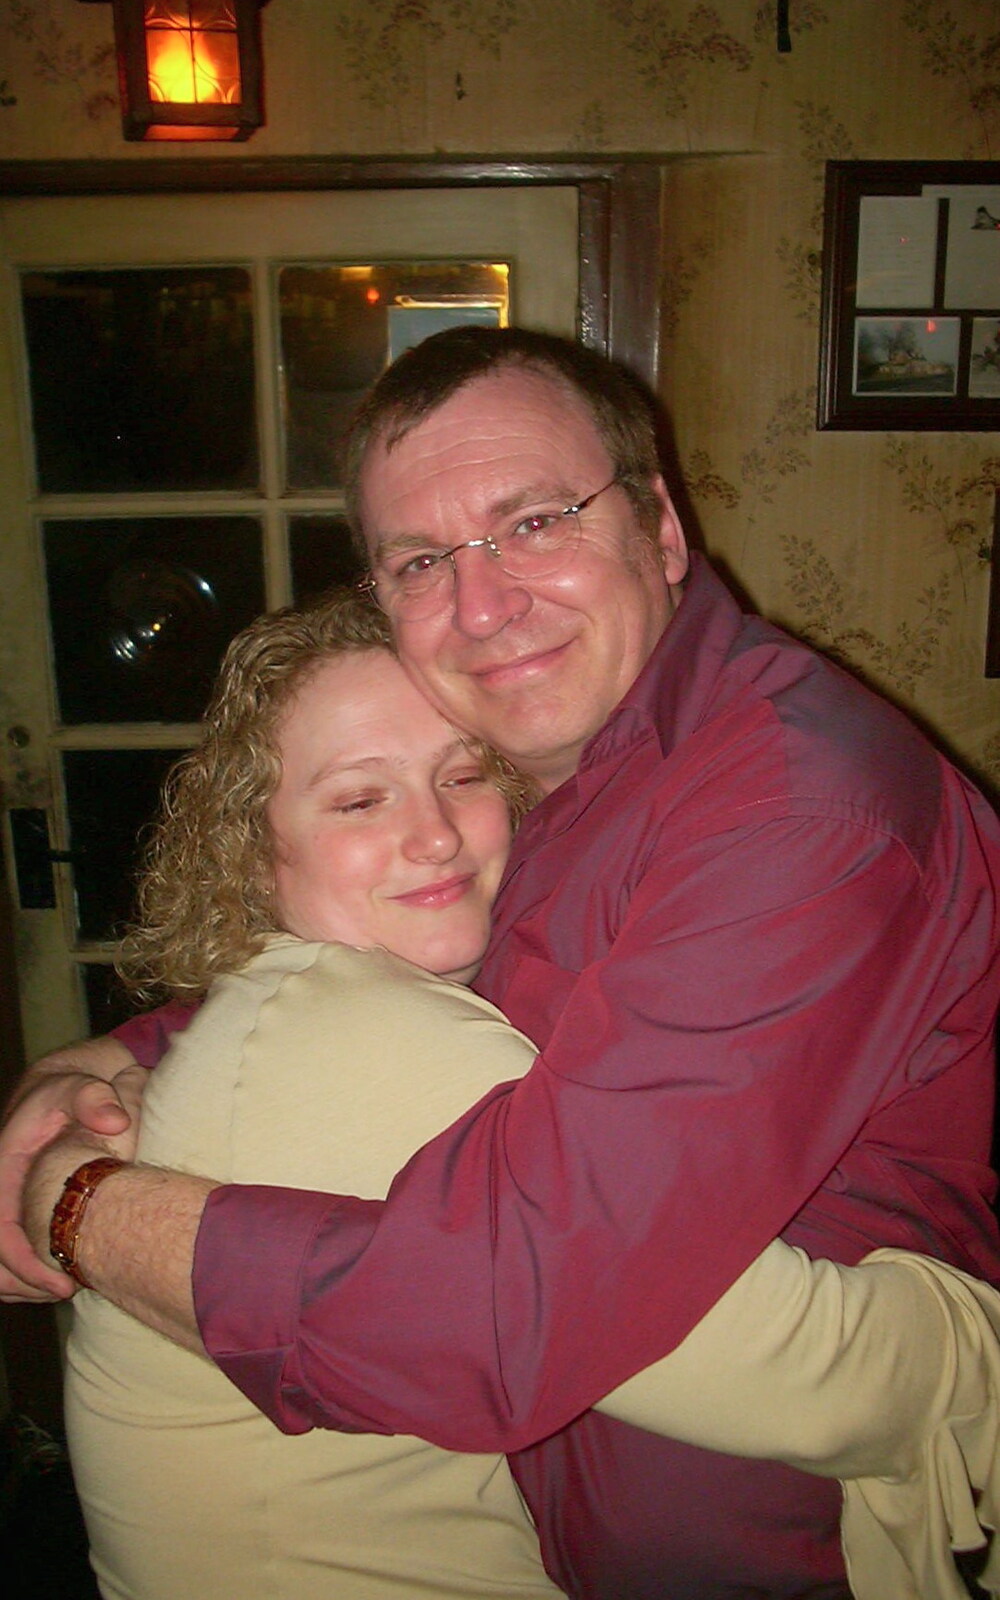 New Year's Eve at the Swan Inn, Brome, Suffolk - 31st December 2002: Sally gives a hug